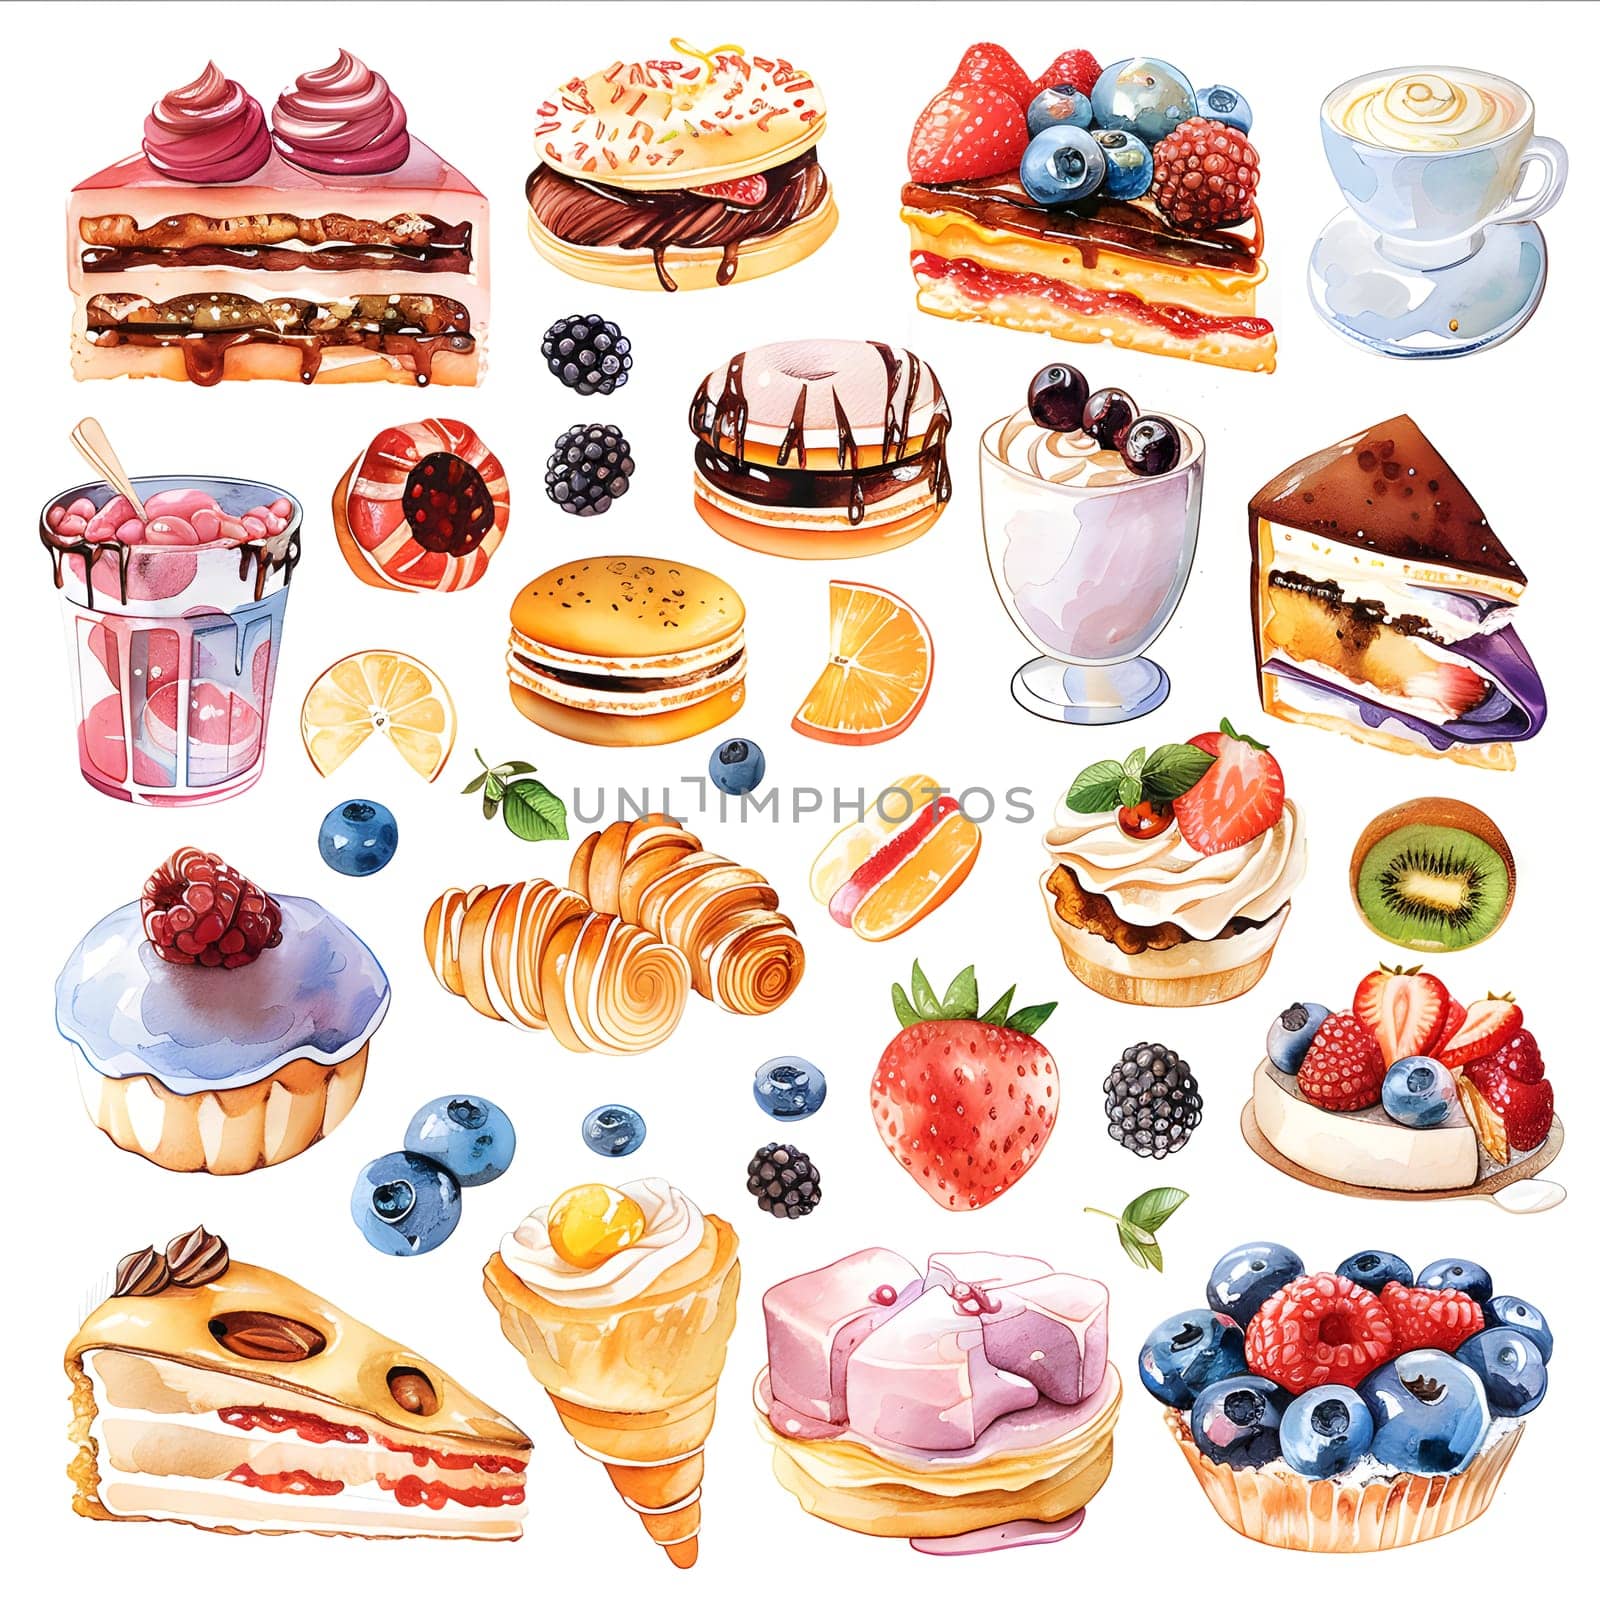 Watercolor paintings of delectable desserts and fresh berries by Nadtochiy